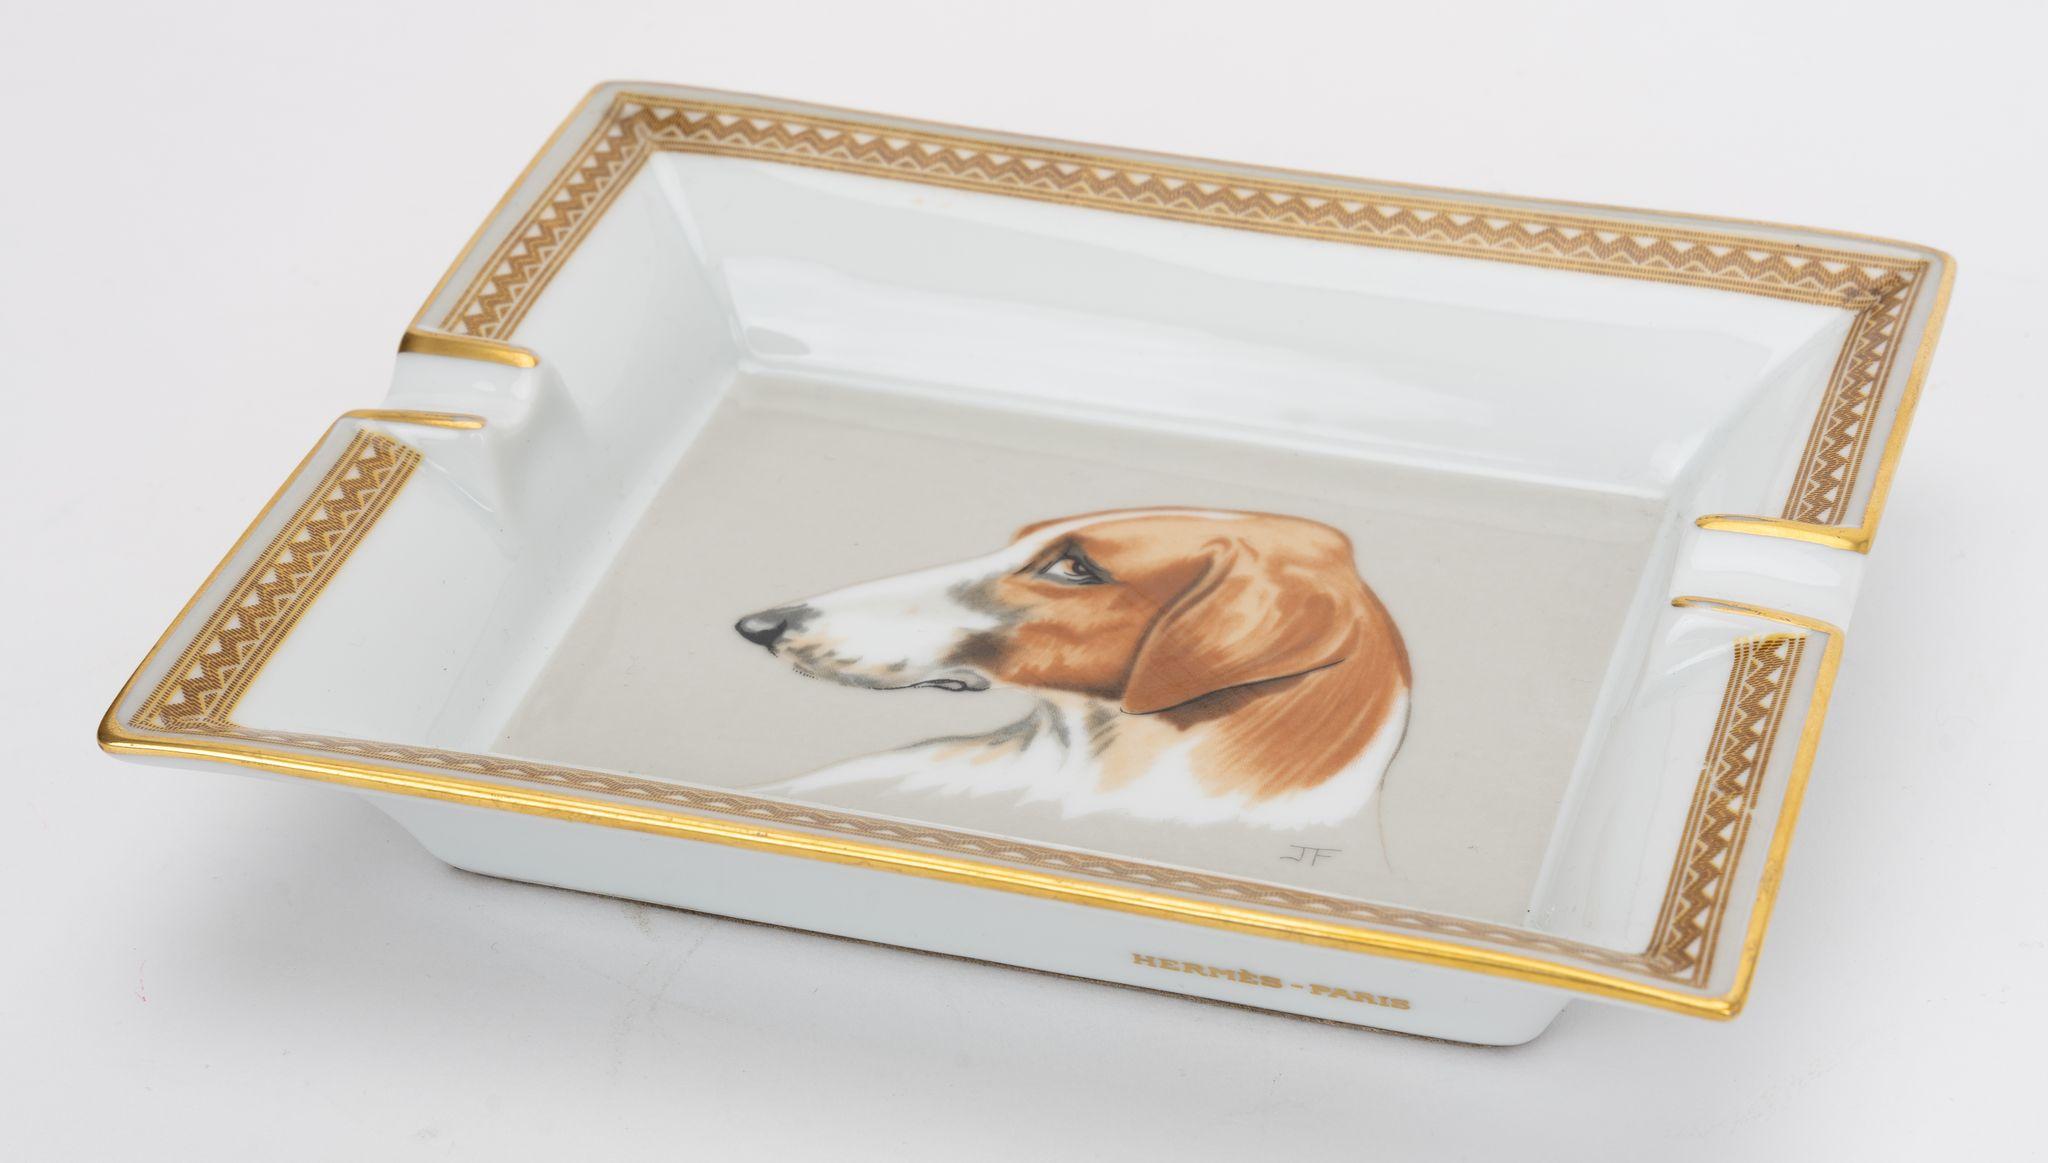 Hermès vintage ashtray in white. In the center is a print of a judgmental looking dog. Gold trim. The piece is in excellent condition